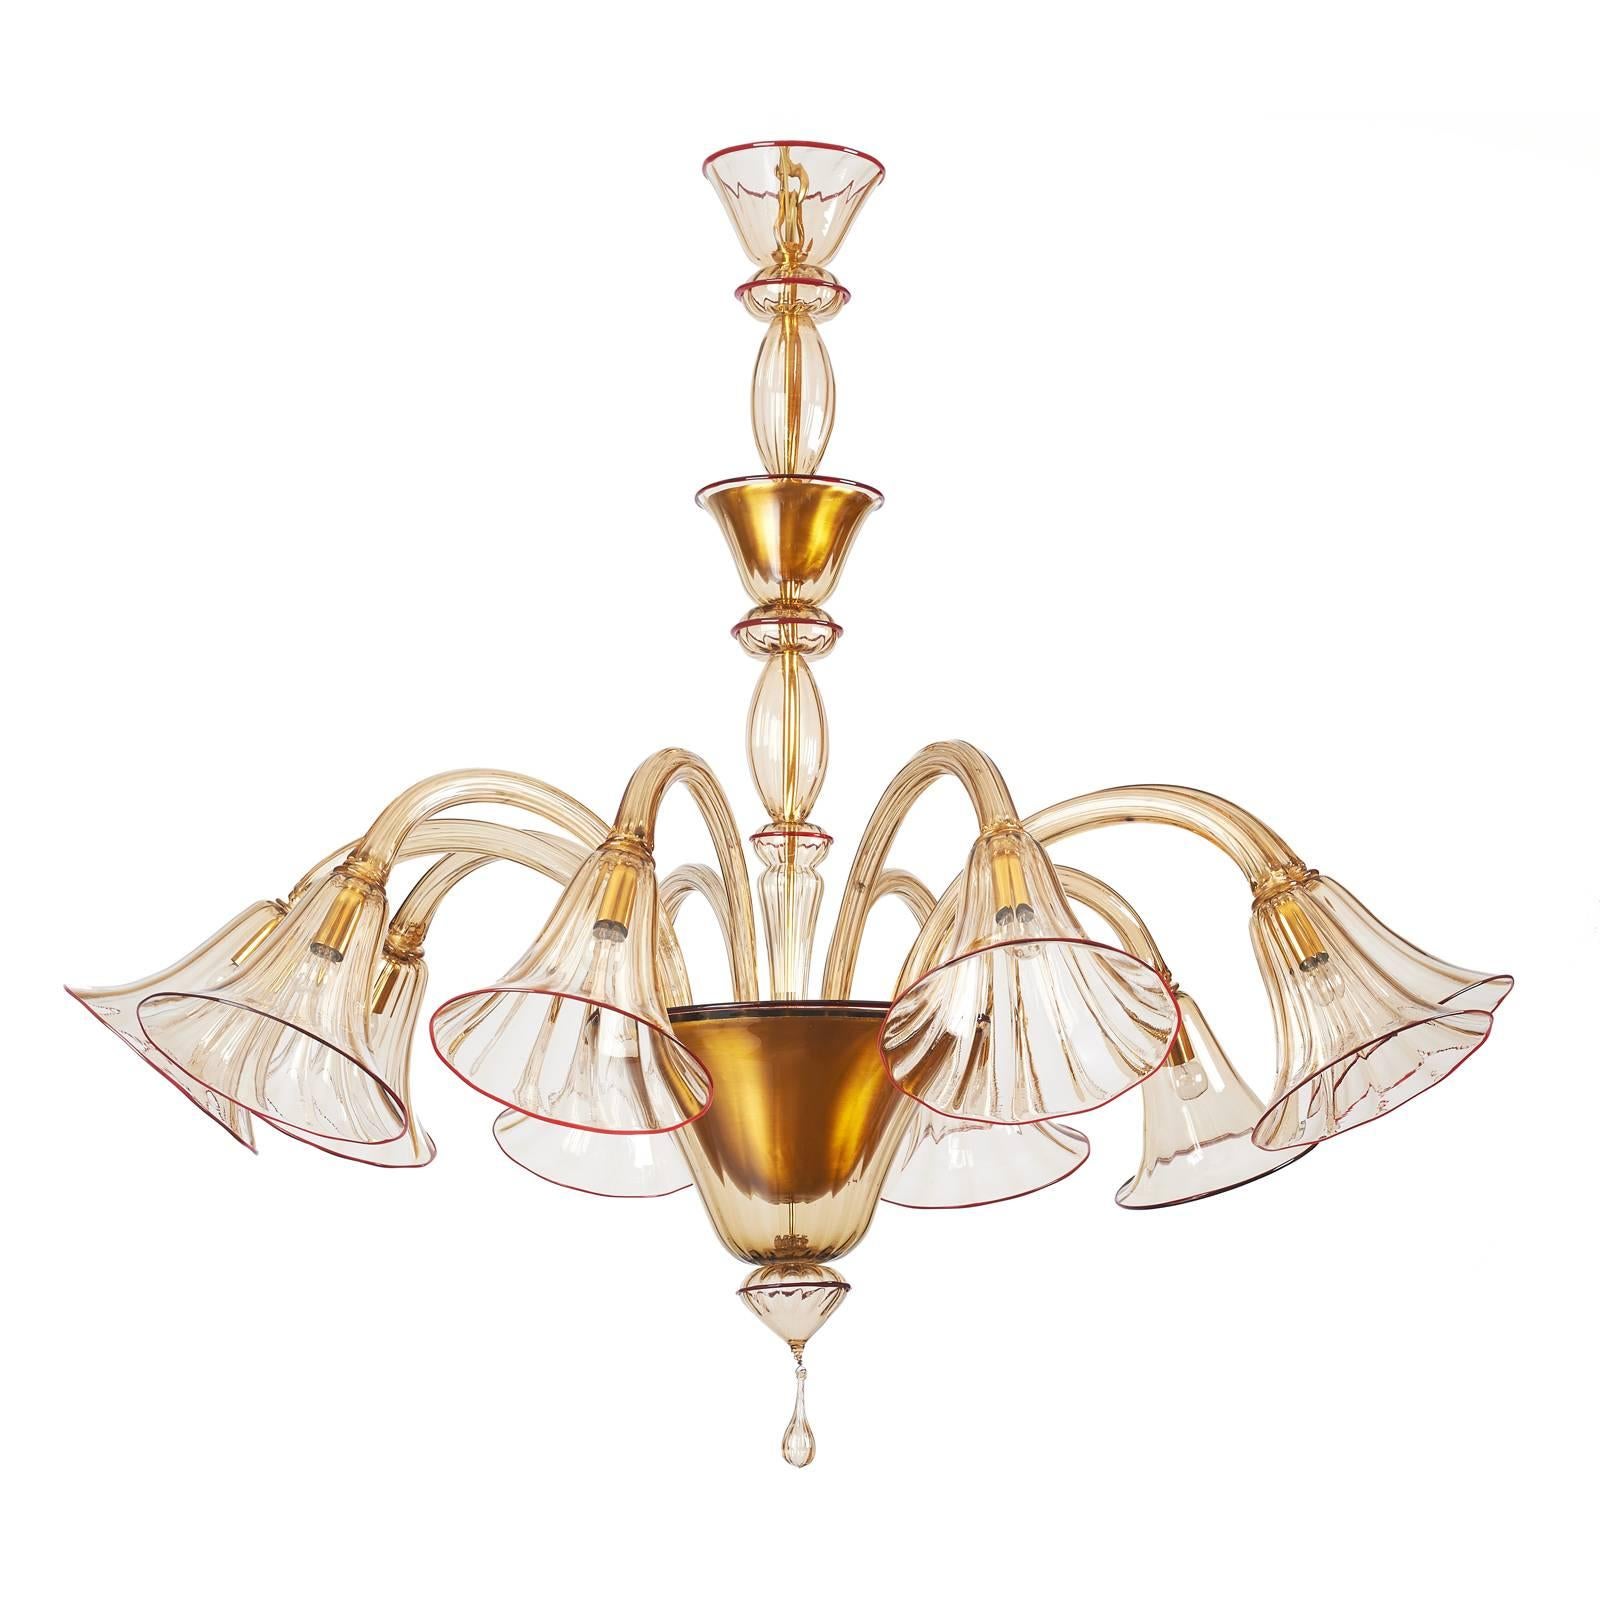 Italian Magnificent Murano Blown Glass Chandelier by Venini with Red Accent, 1920s For Sale